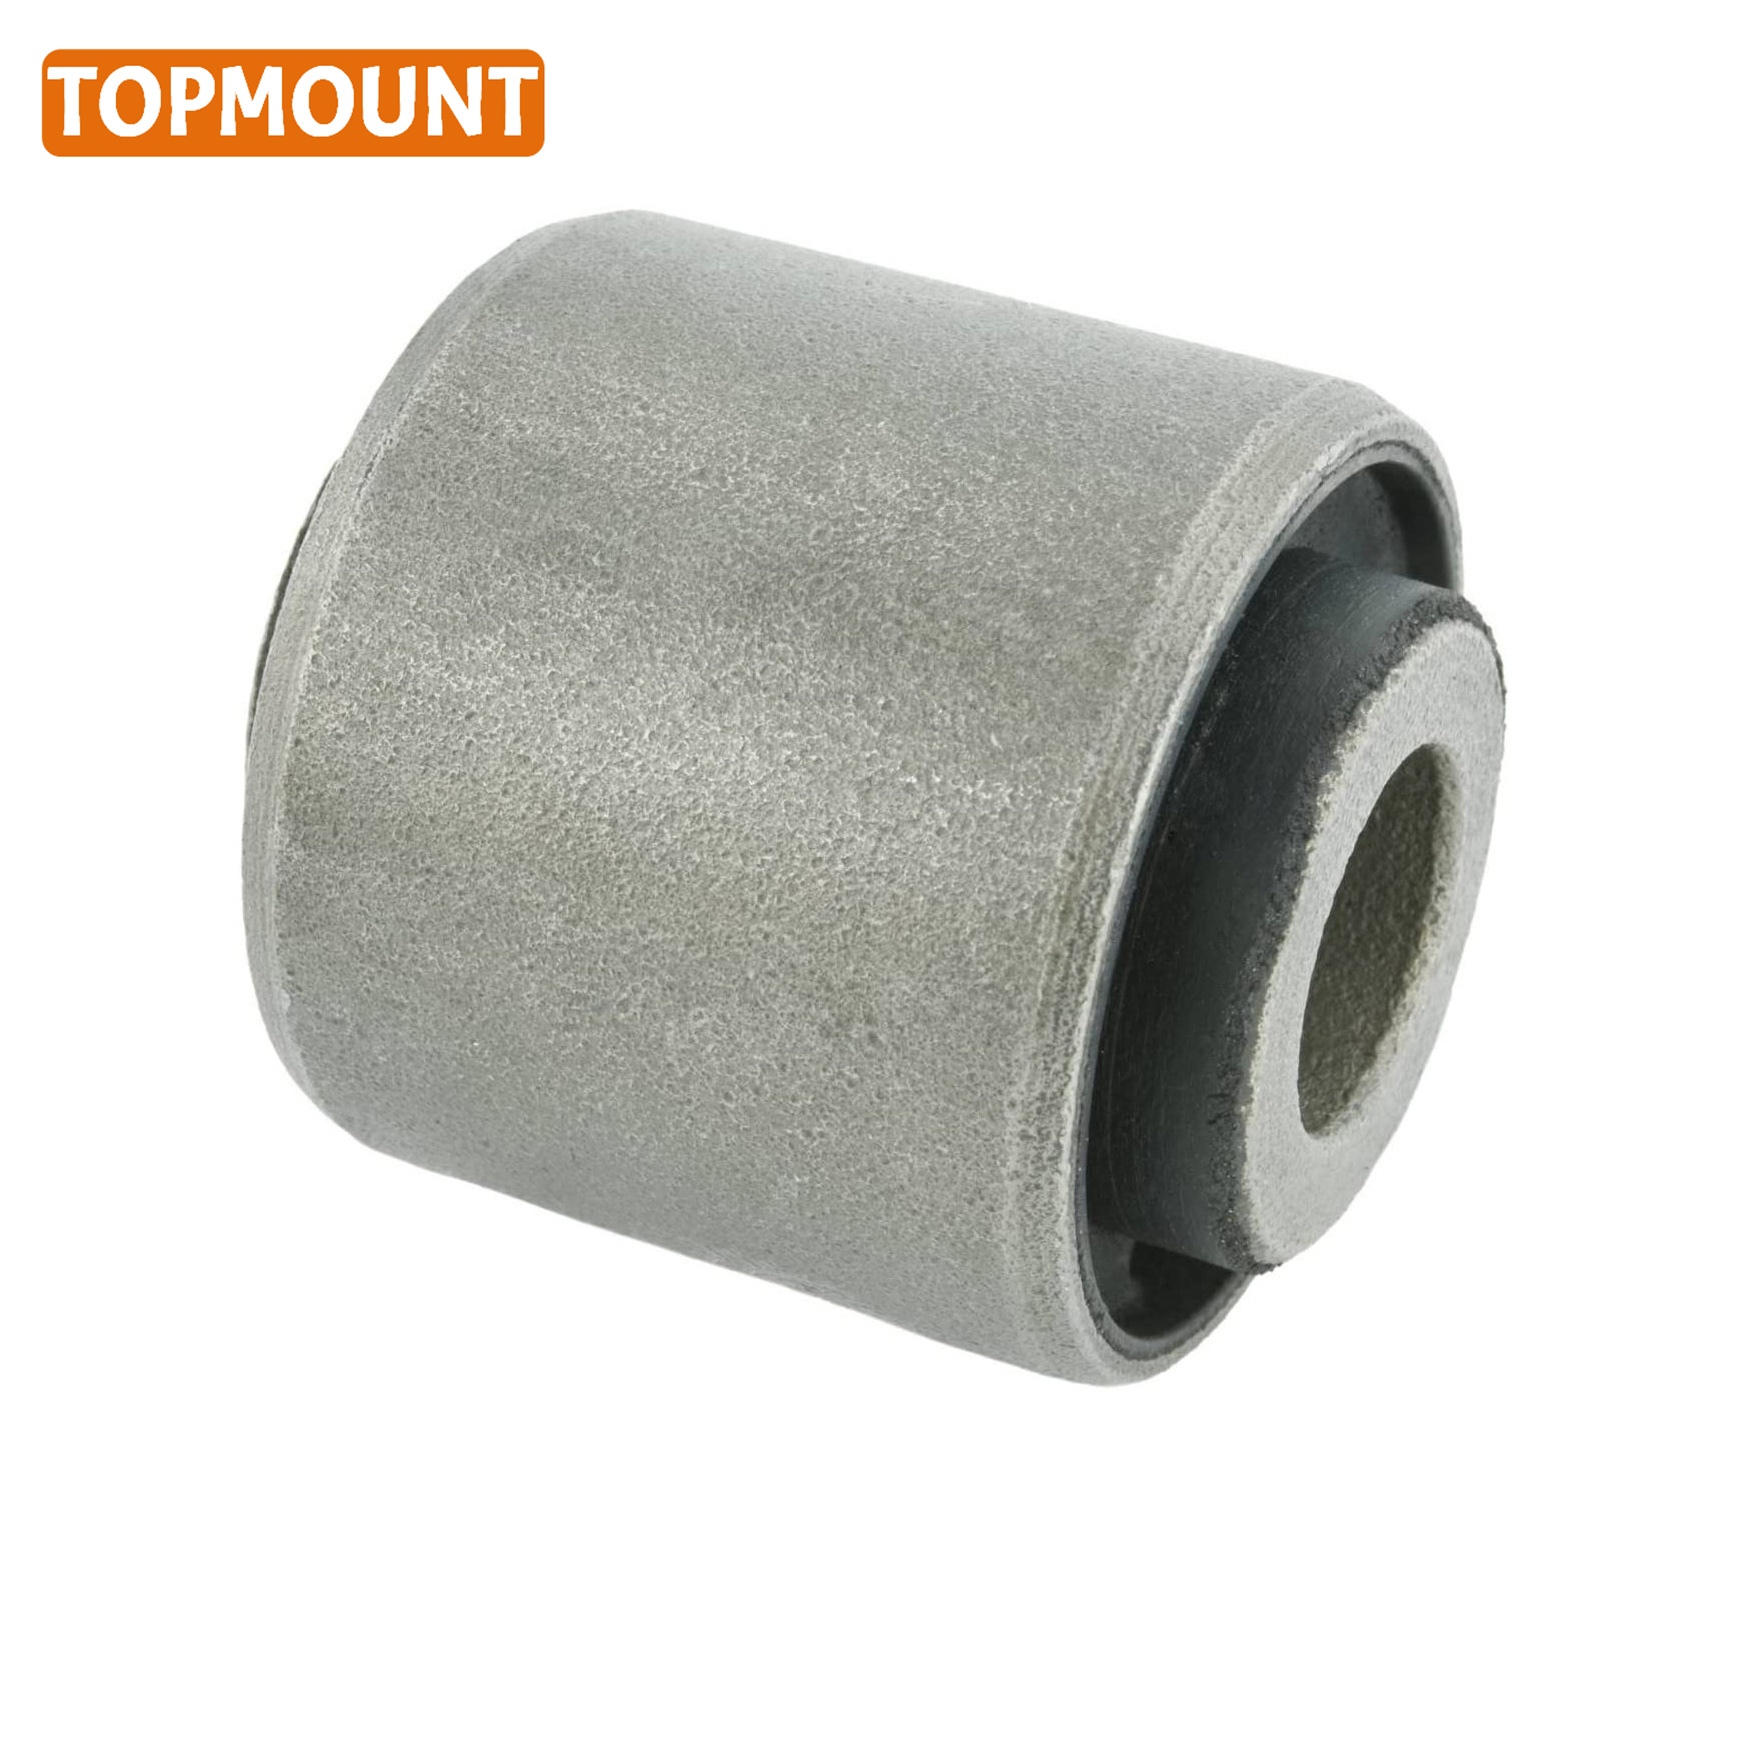 55110-HA00A BBP3-28-500A 4S4Z-5A638-A TOPMOUNT Auto Parts Rubber Lower Front Control Arm Bushing For Nissan Mazda Ford